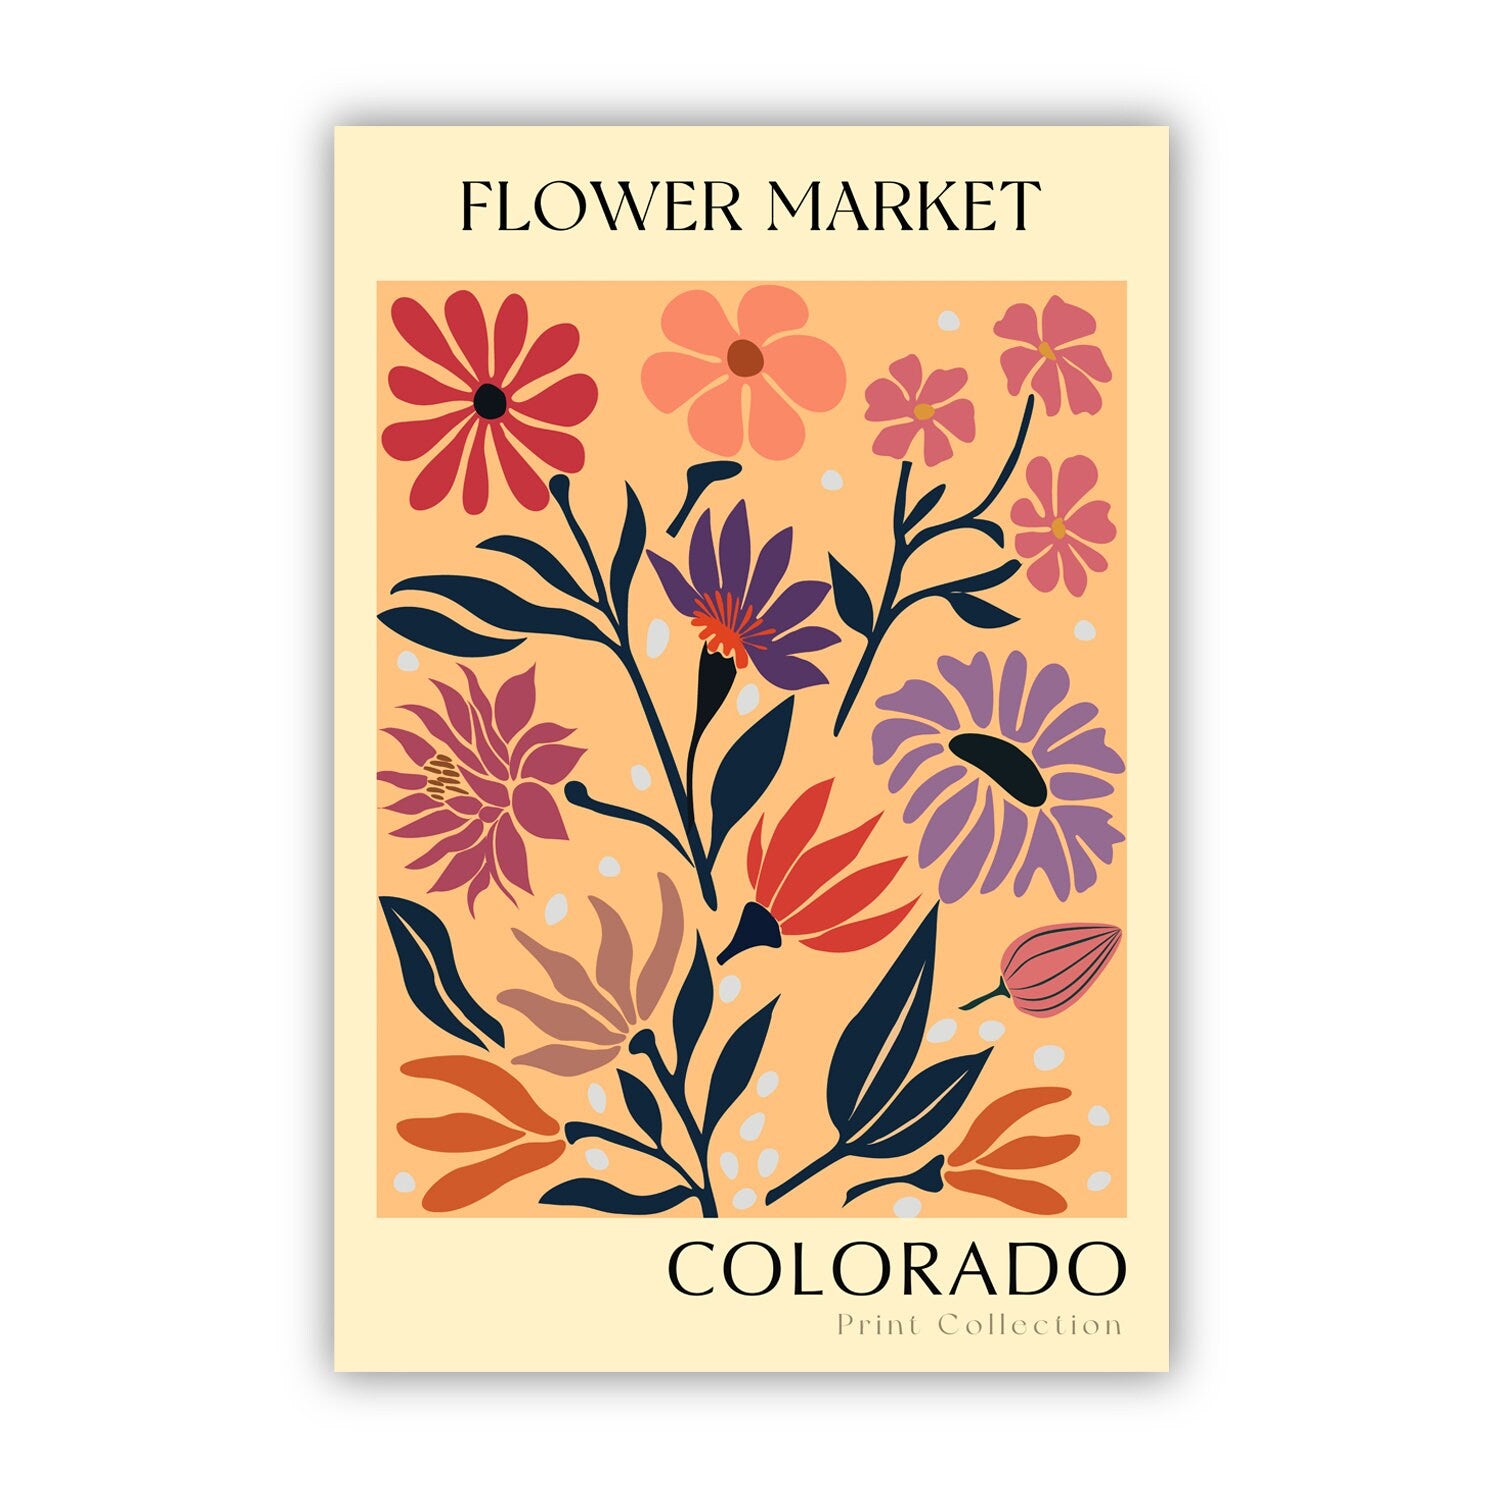 Colorado State flower print, States posters, Colorado flower market poster, Botanical posters, Natural poster artwork, Boho floral wall art